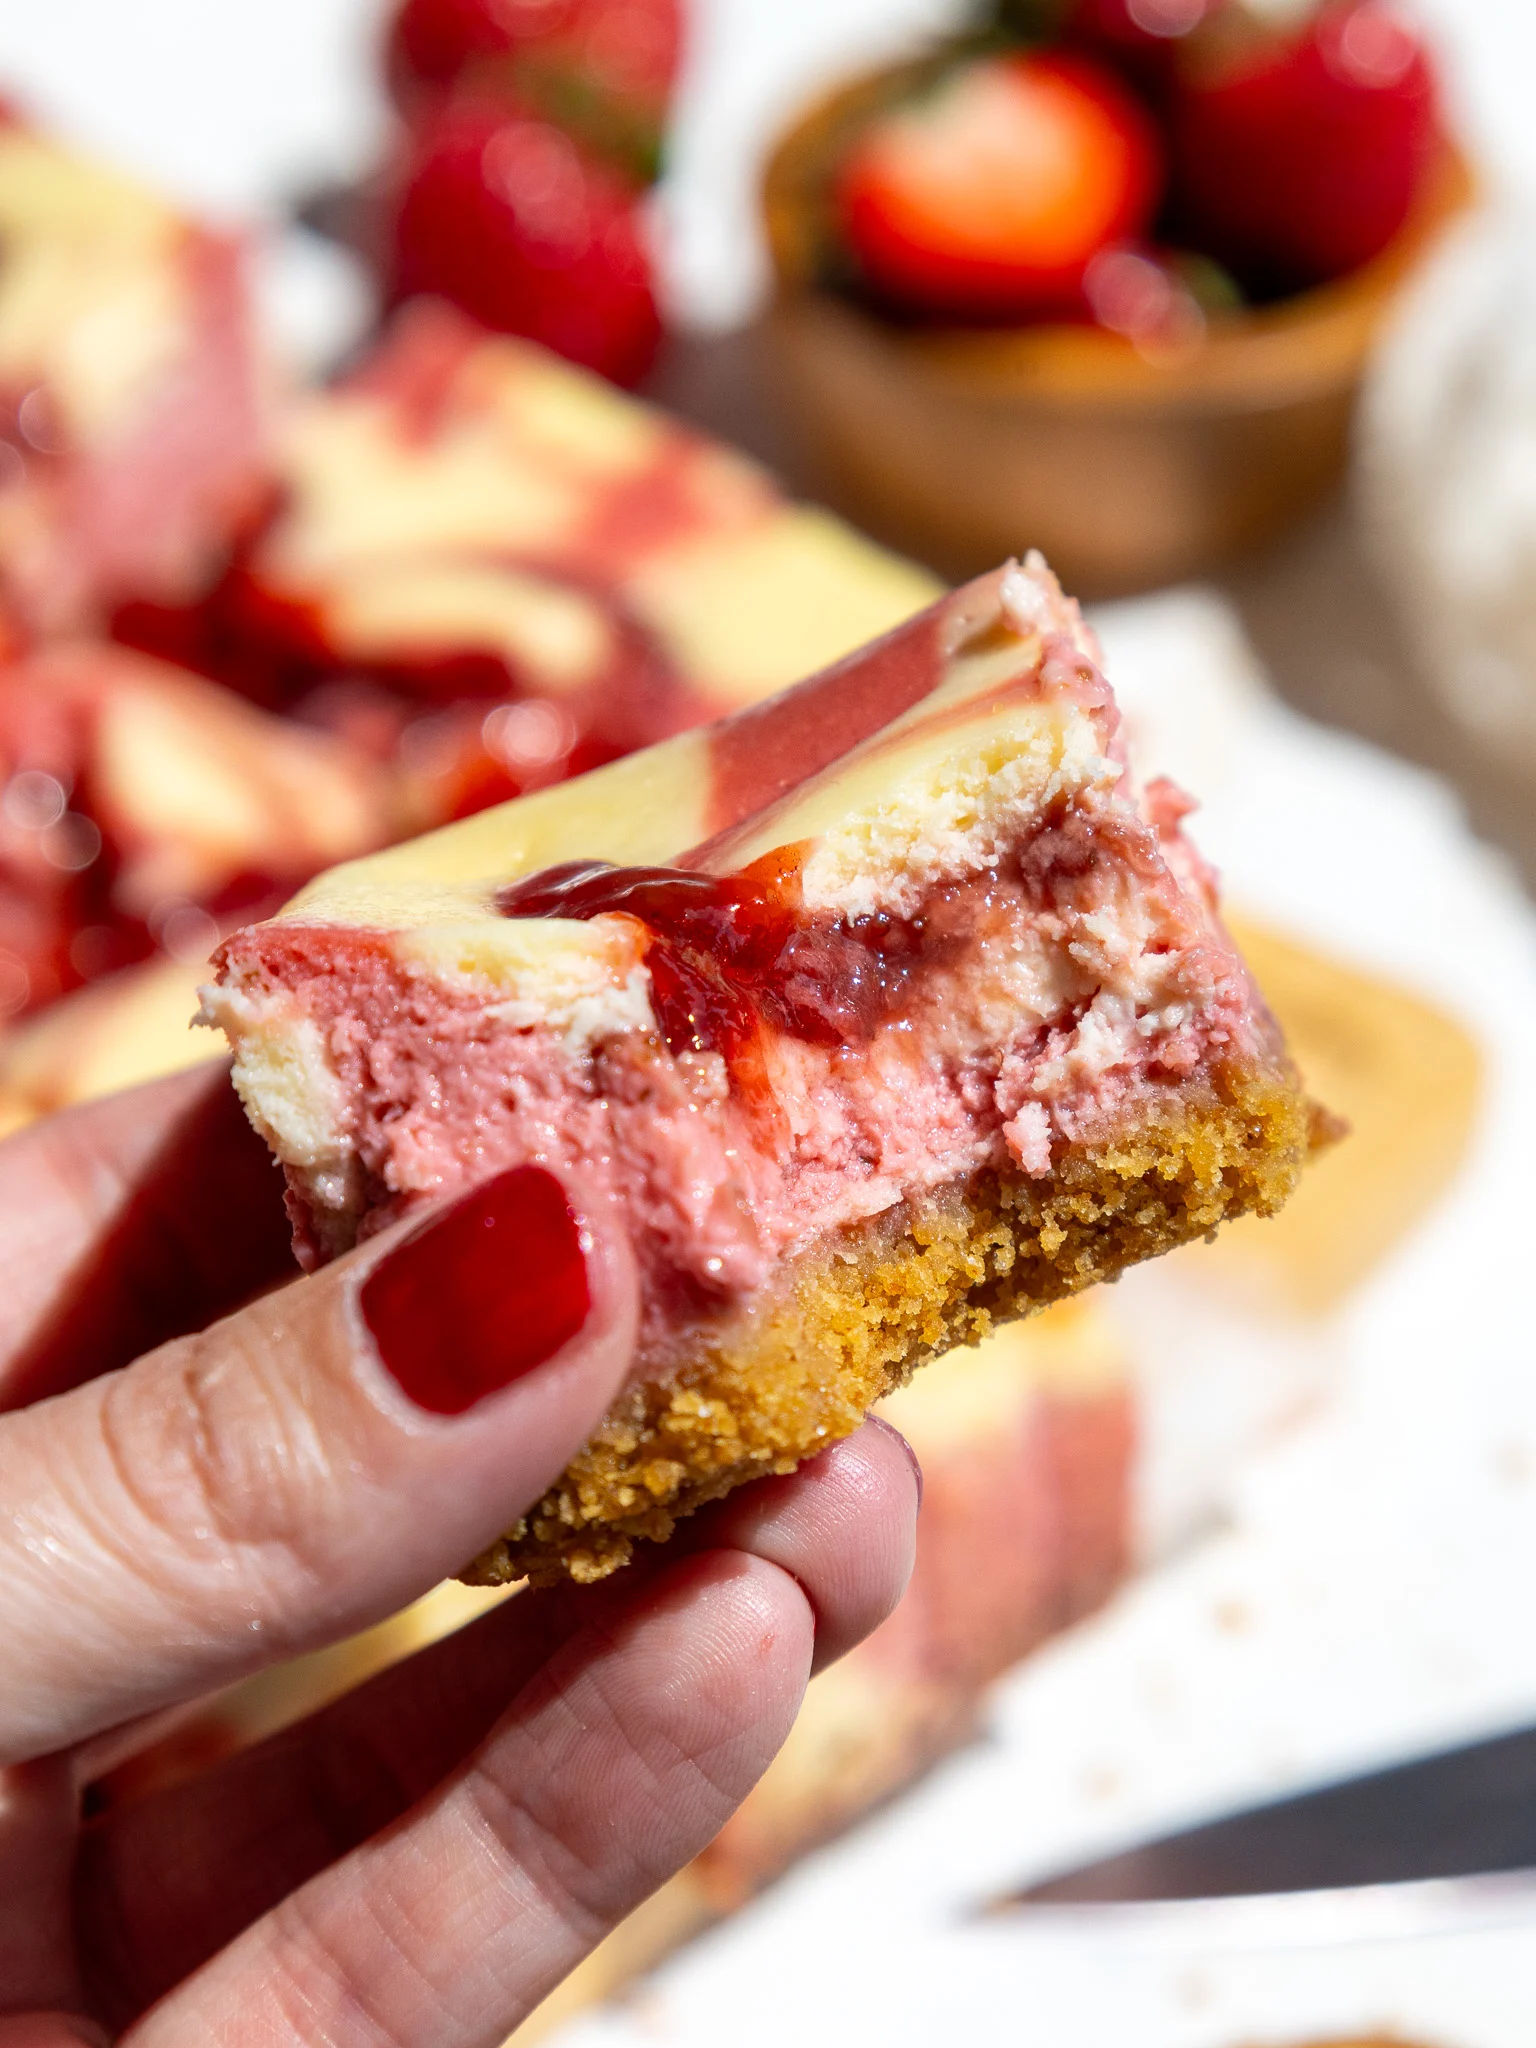 image of a strawberry cheesecake bar that's been bitten into to show it's strawberry and regular cream cheese filling